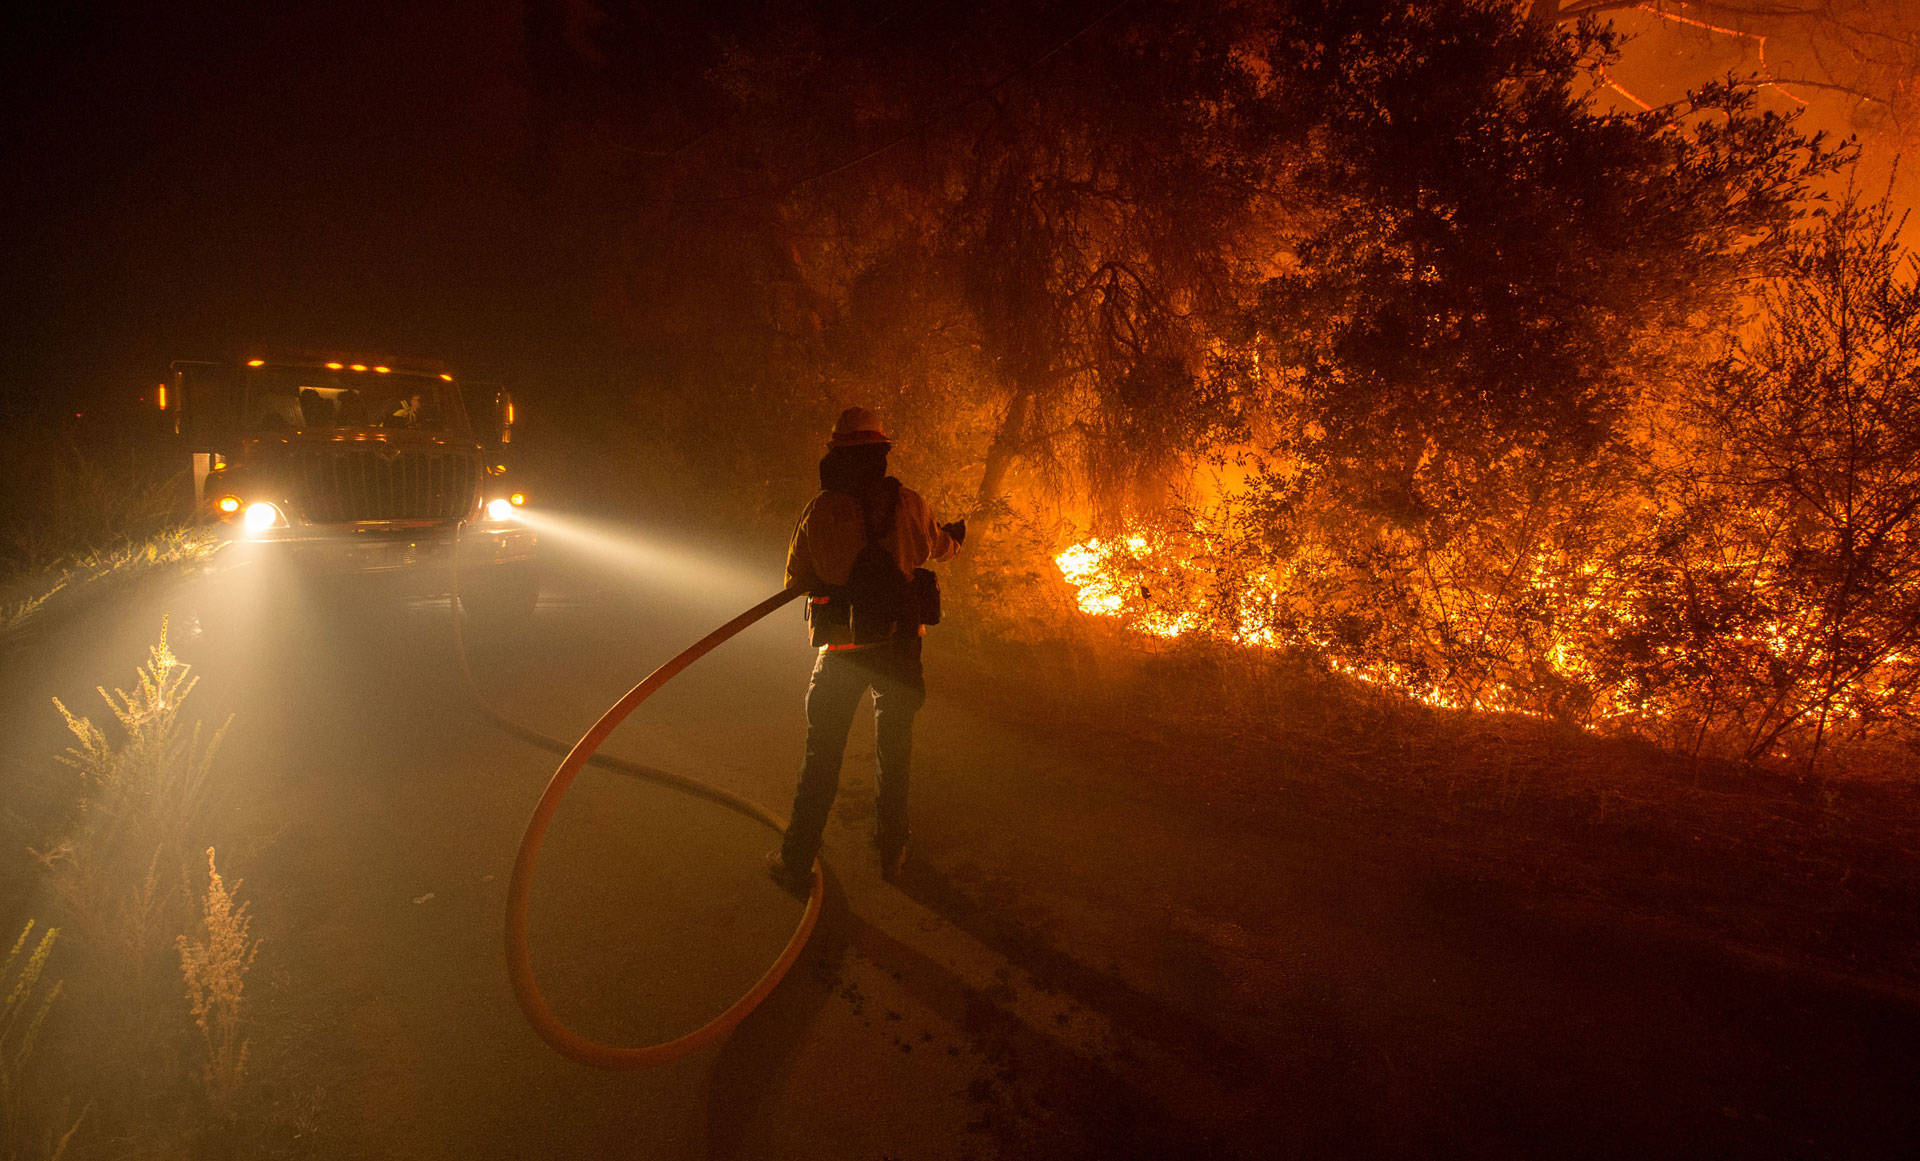 A firefighter douses flames as they approach a road in the Santa Cruz Mountains near Loma Prieta on Sept. 28, 2016. Josh Edelson/AFP/Getty Images